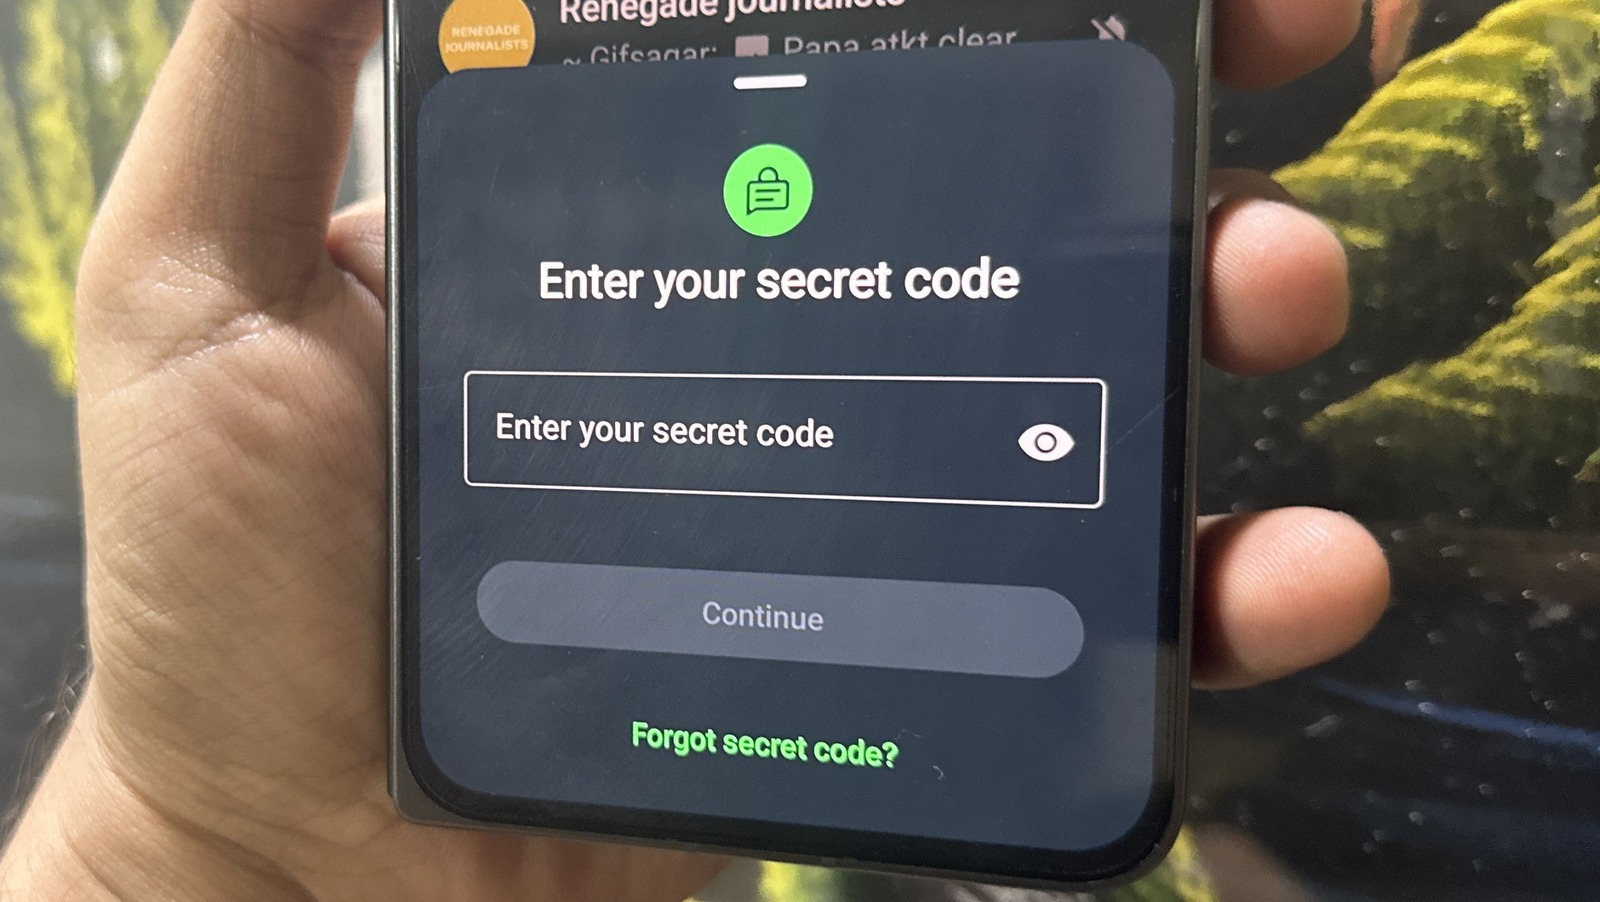 WhatsApp Will Now Let You Keep Your Sensitive Conversations Locked Behind A Secret Code